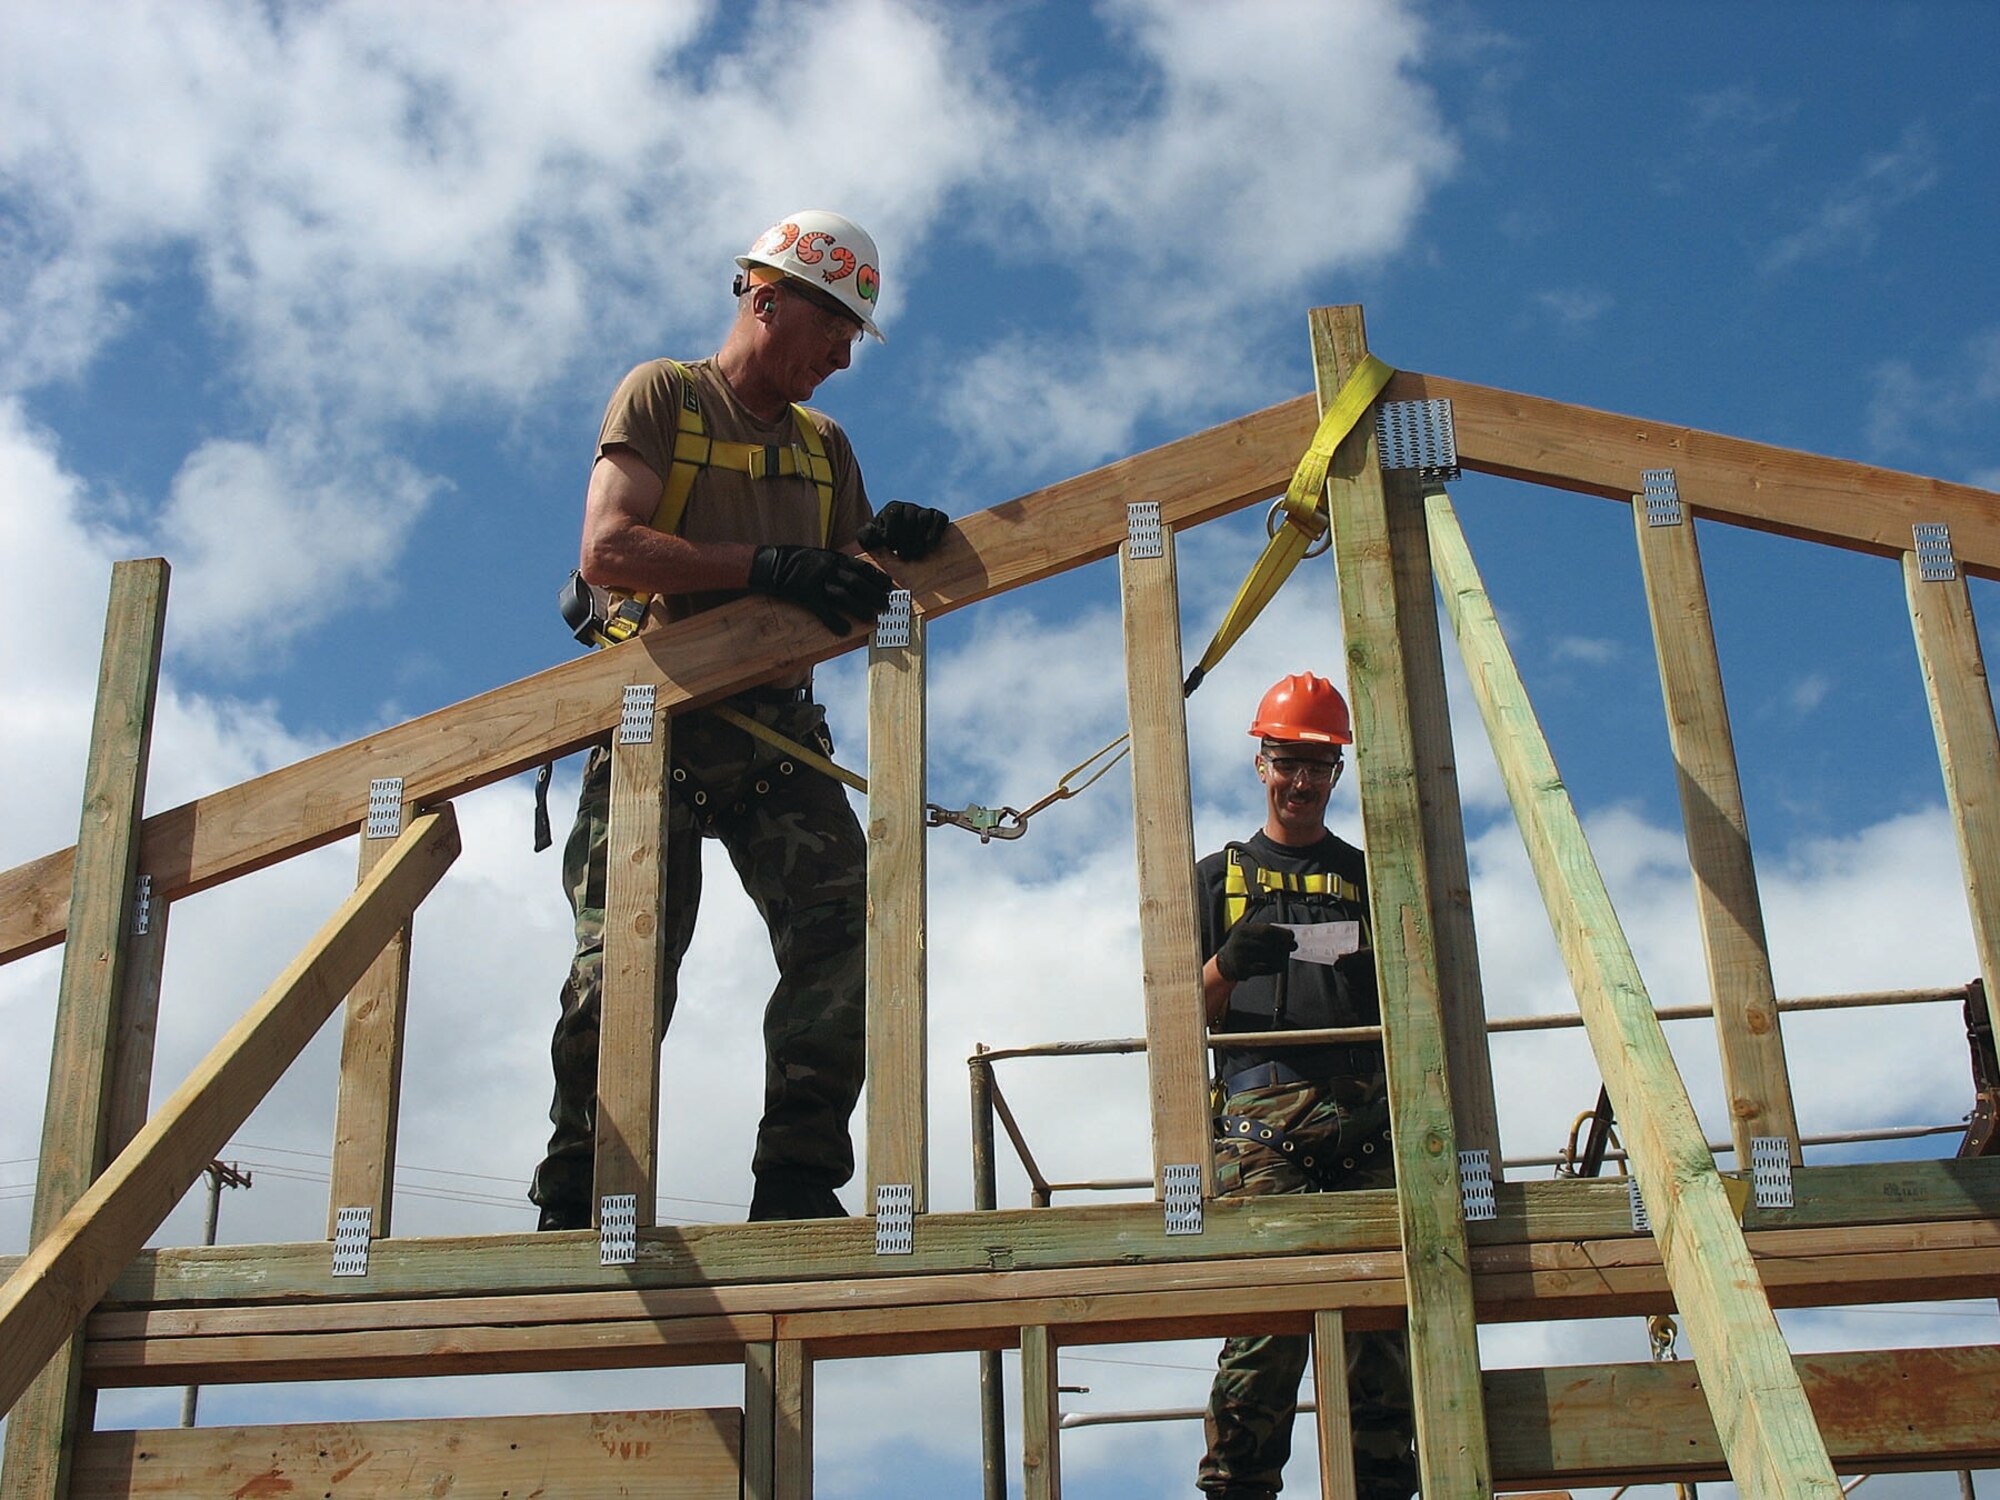 Senior Master Sgt. John Lough, Heavy Equipment Operator, and Tech. Sgt. Steve Tracey, Power Production, work on framing one of the living structures at the “Aloha Gardens’ compound.